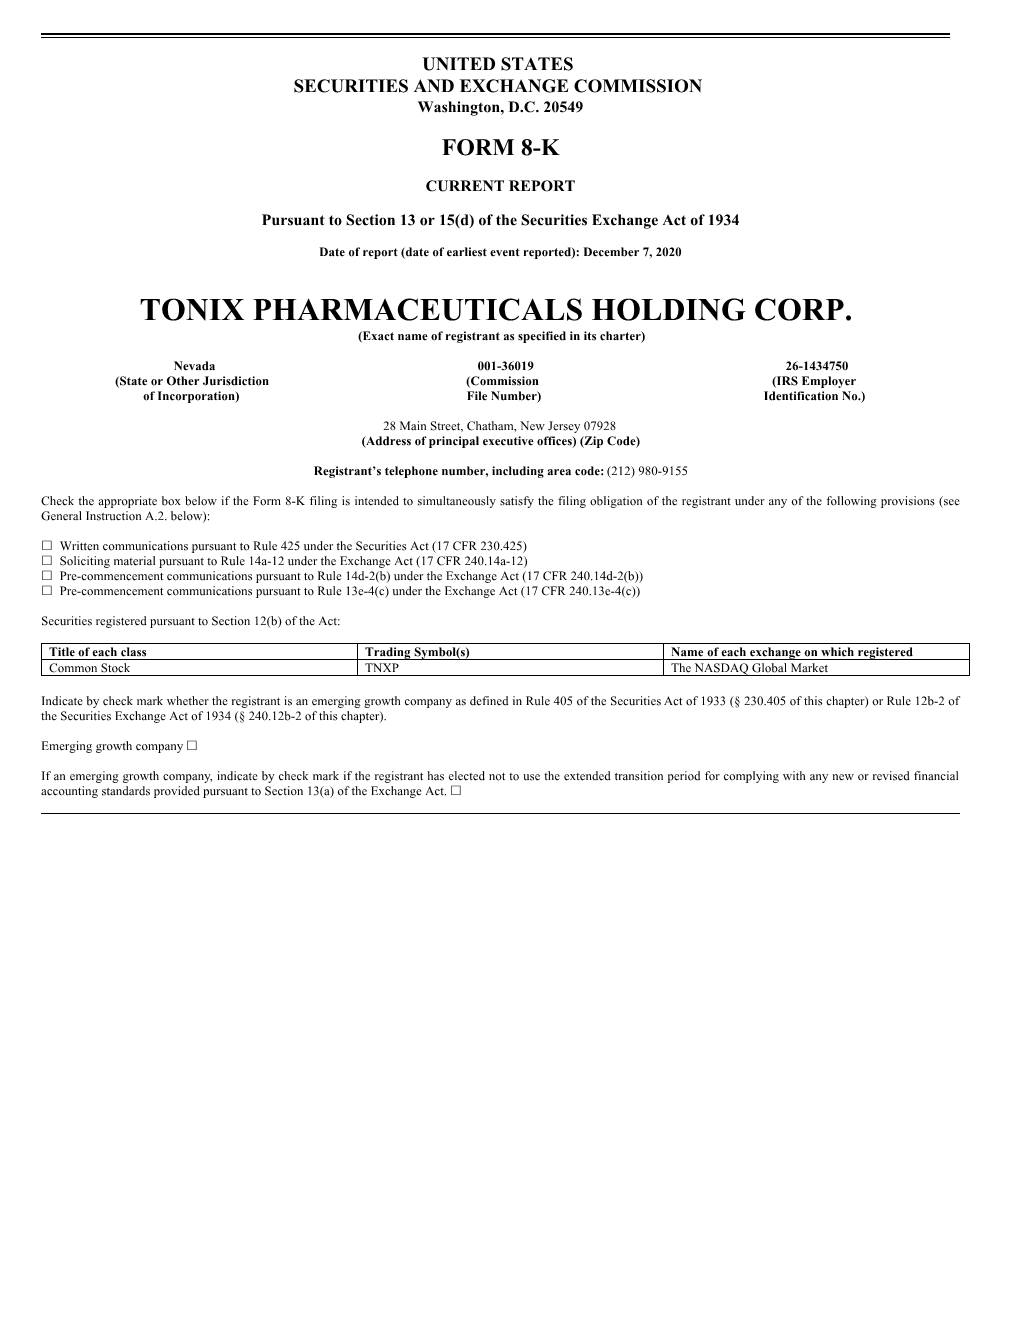 TONIX PHARMACEUTICALS HOLDING CORP. (Exact Name of Registrant As Specified in Its Charter)